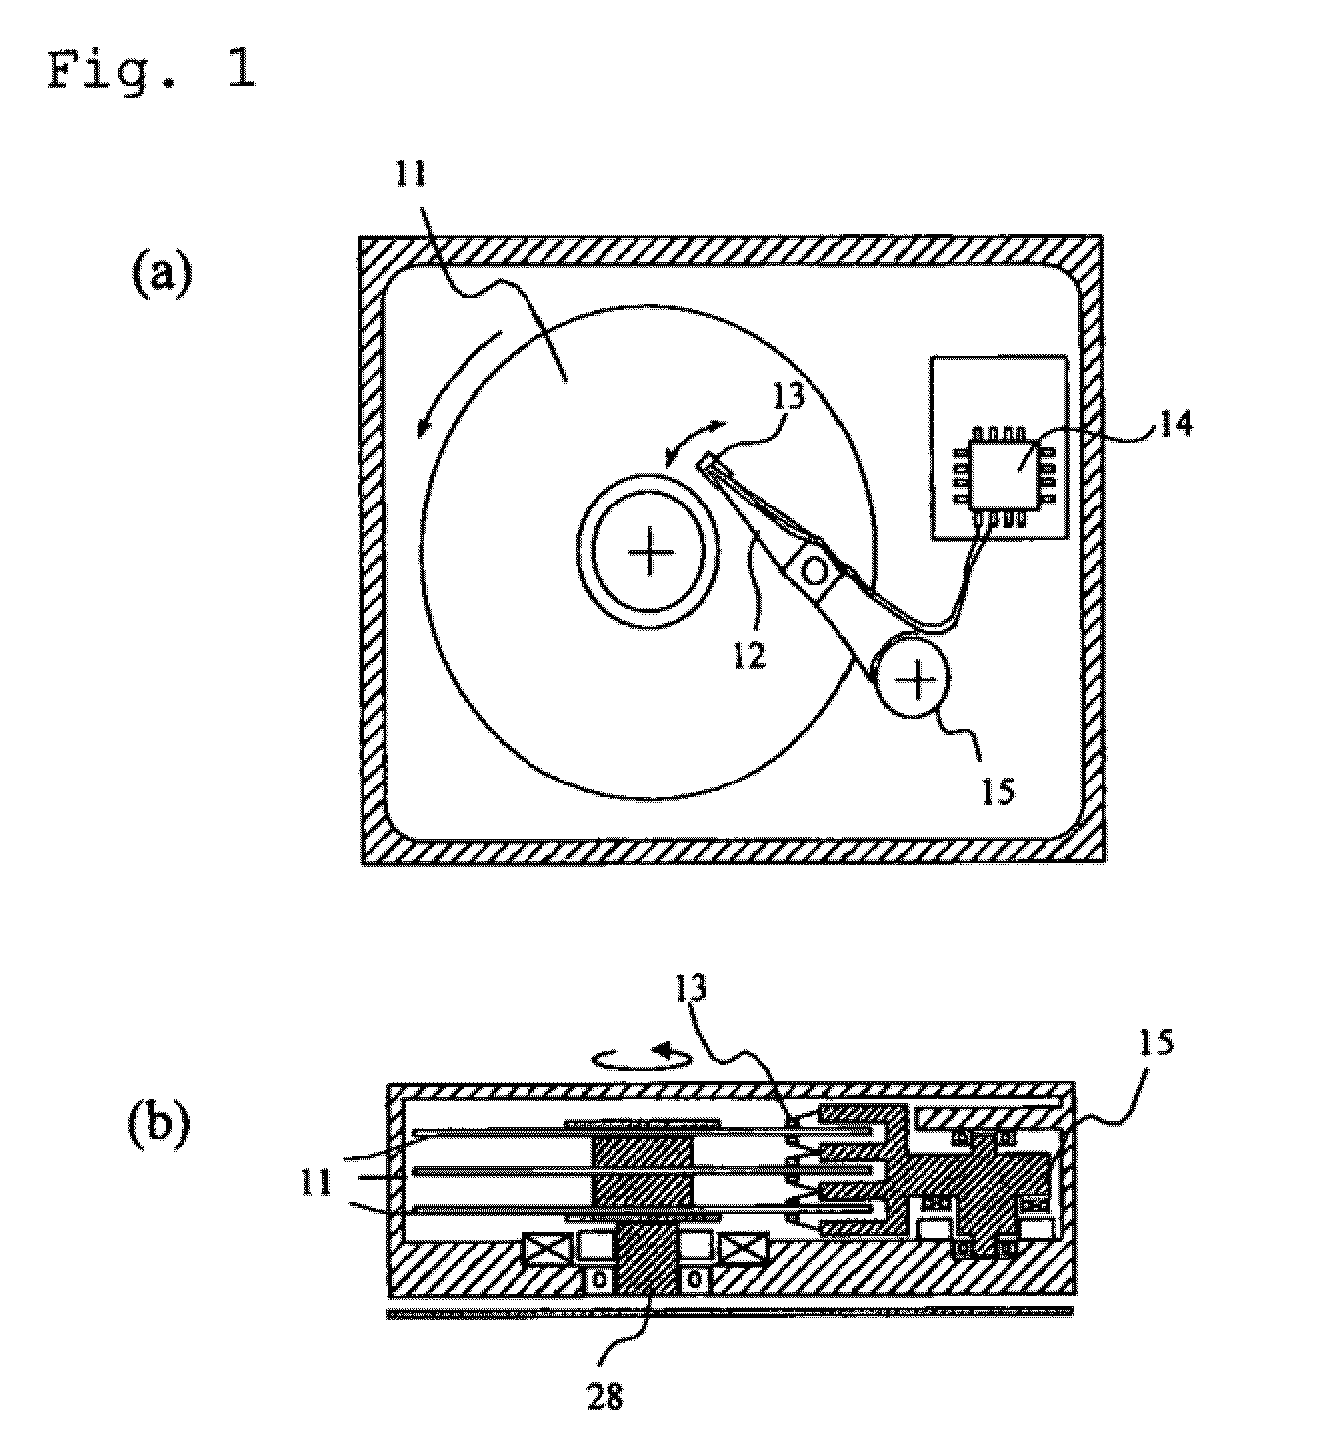 Magnetic Recording Head, Method of Manufacturing the Same, and Magnetic Recording/Reproducing Device